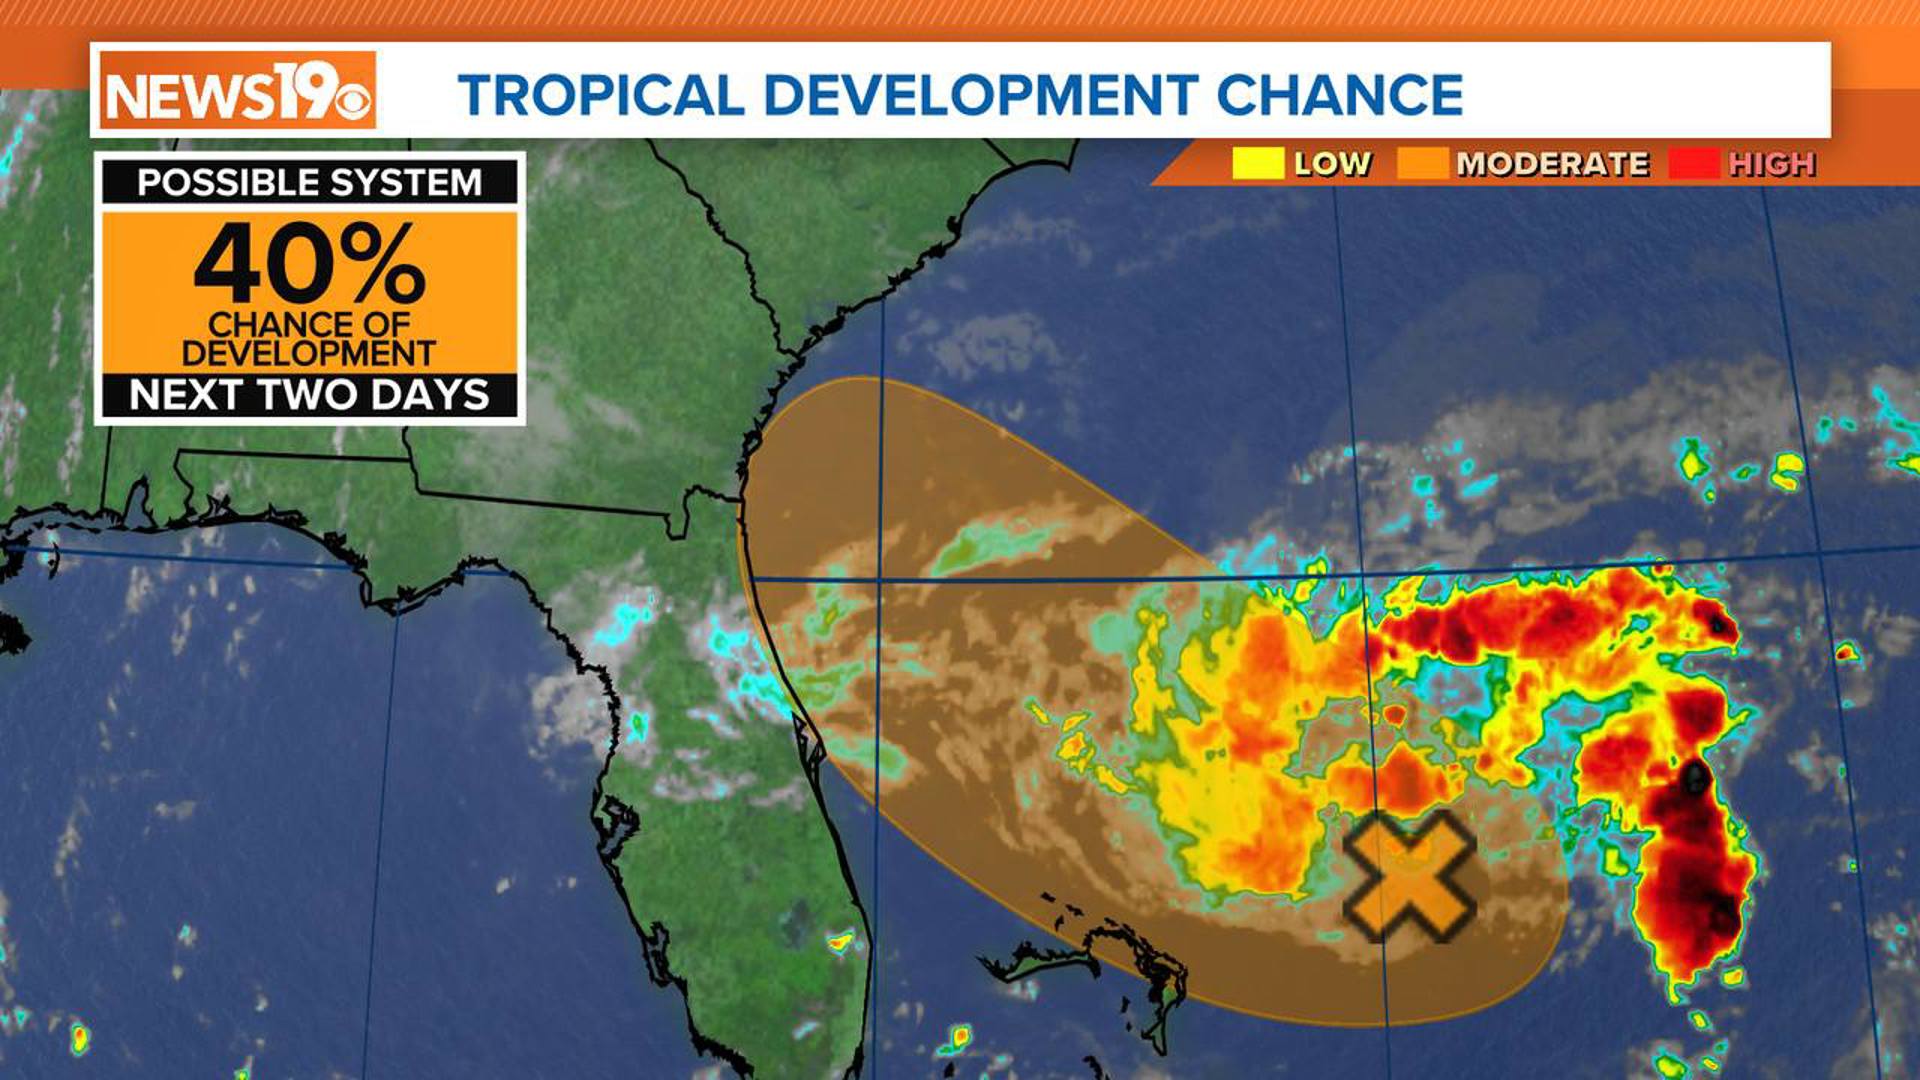 Residents along the northeastern coast of Florida and the Georgia coast are advised to watch this system closely.